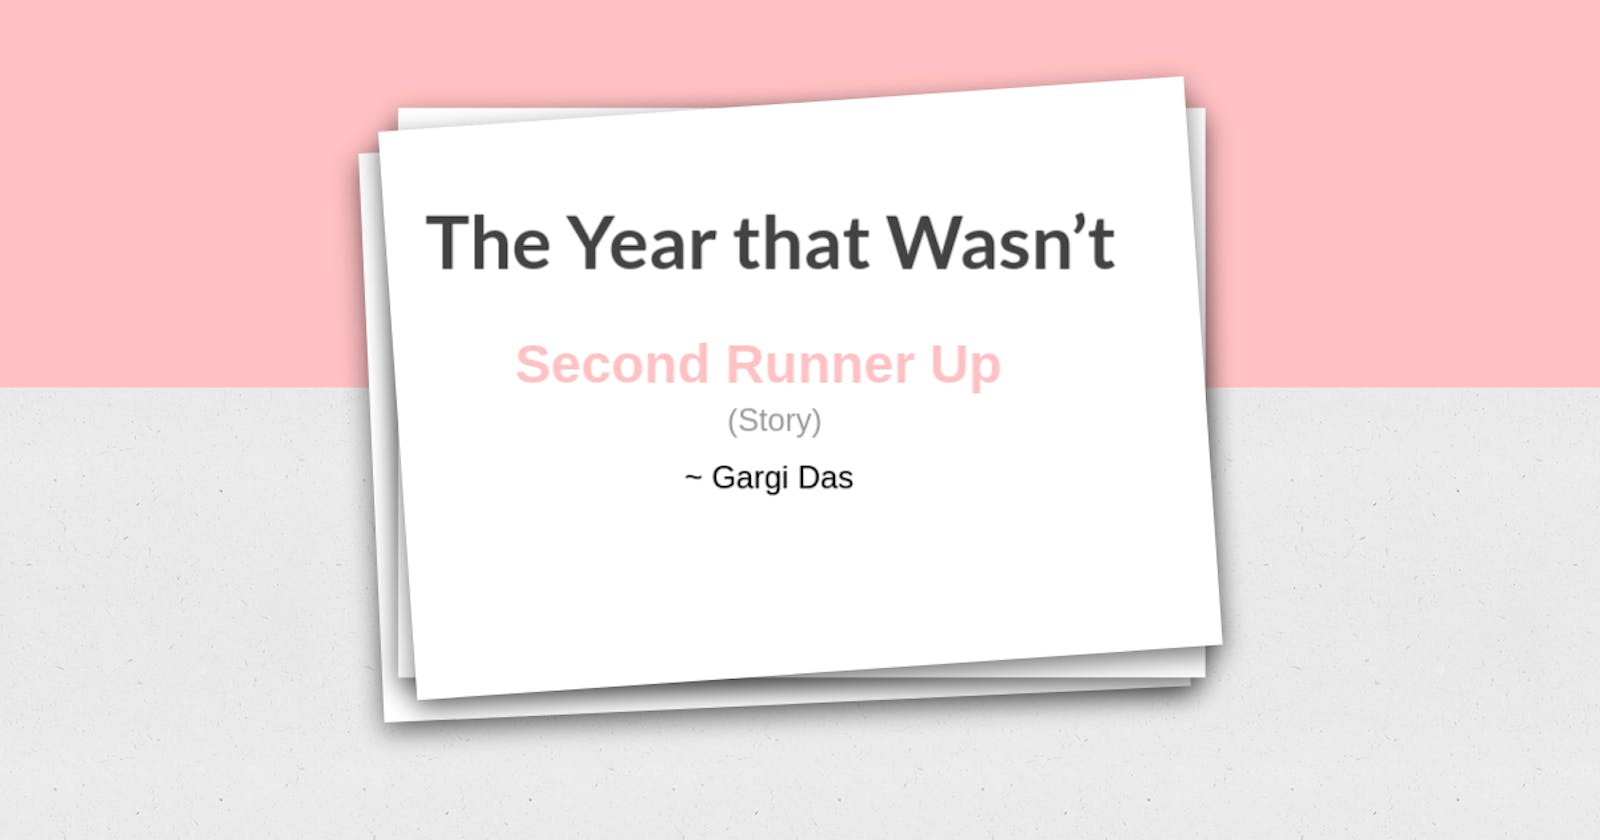 Second Runner Up (Story) - The Year that Wasn't